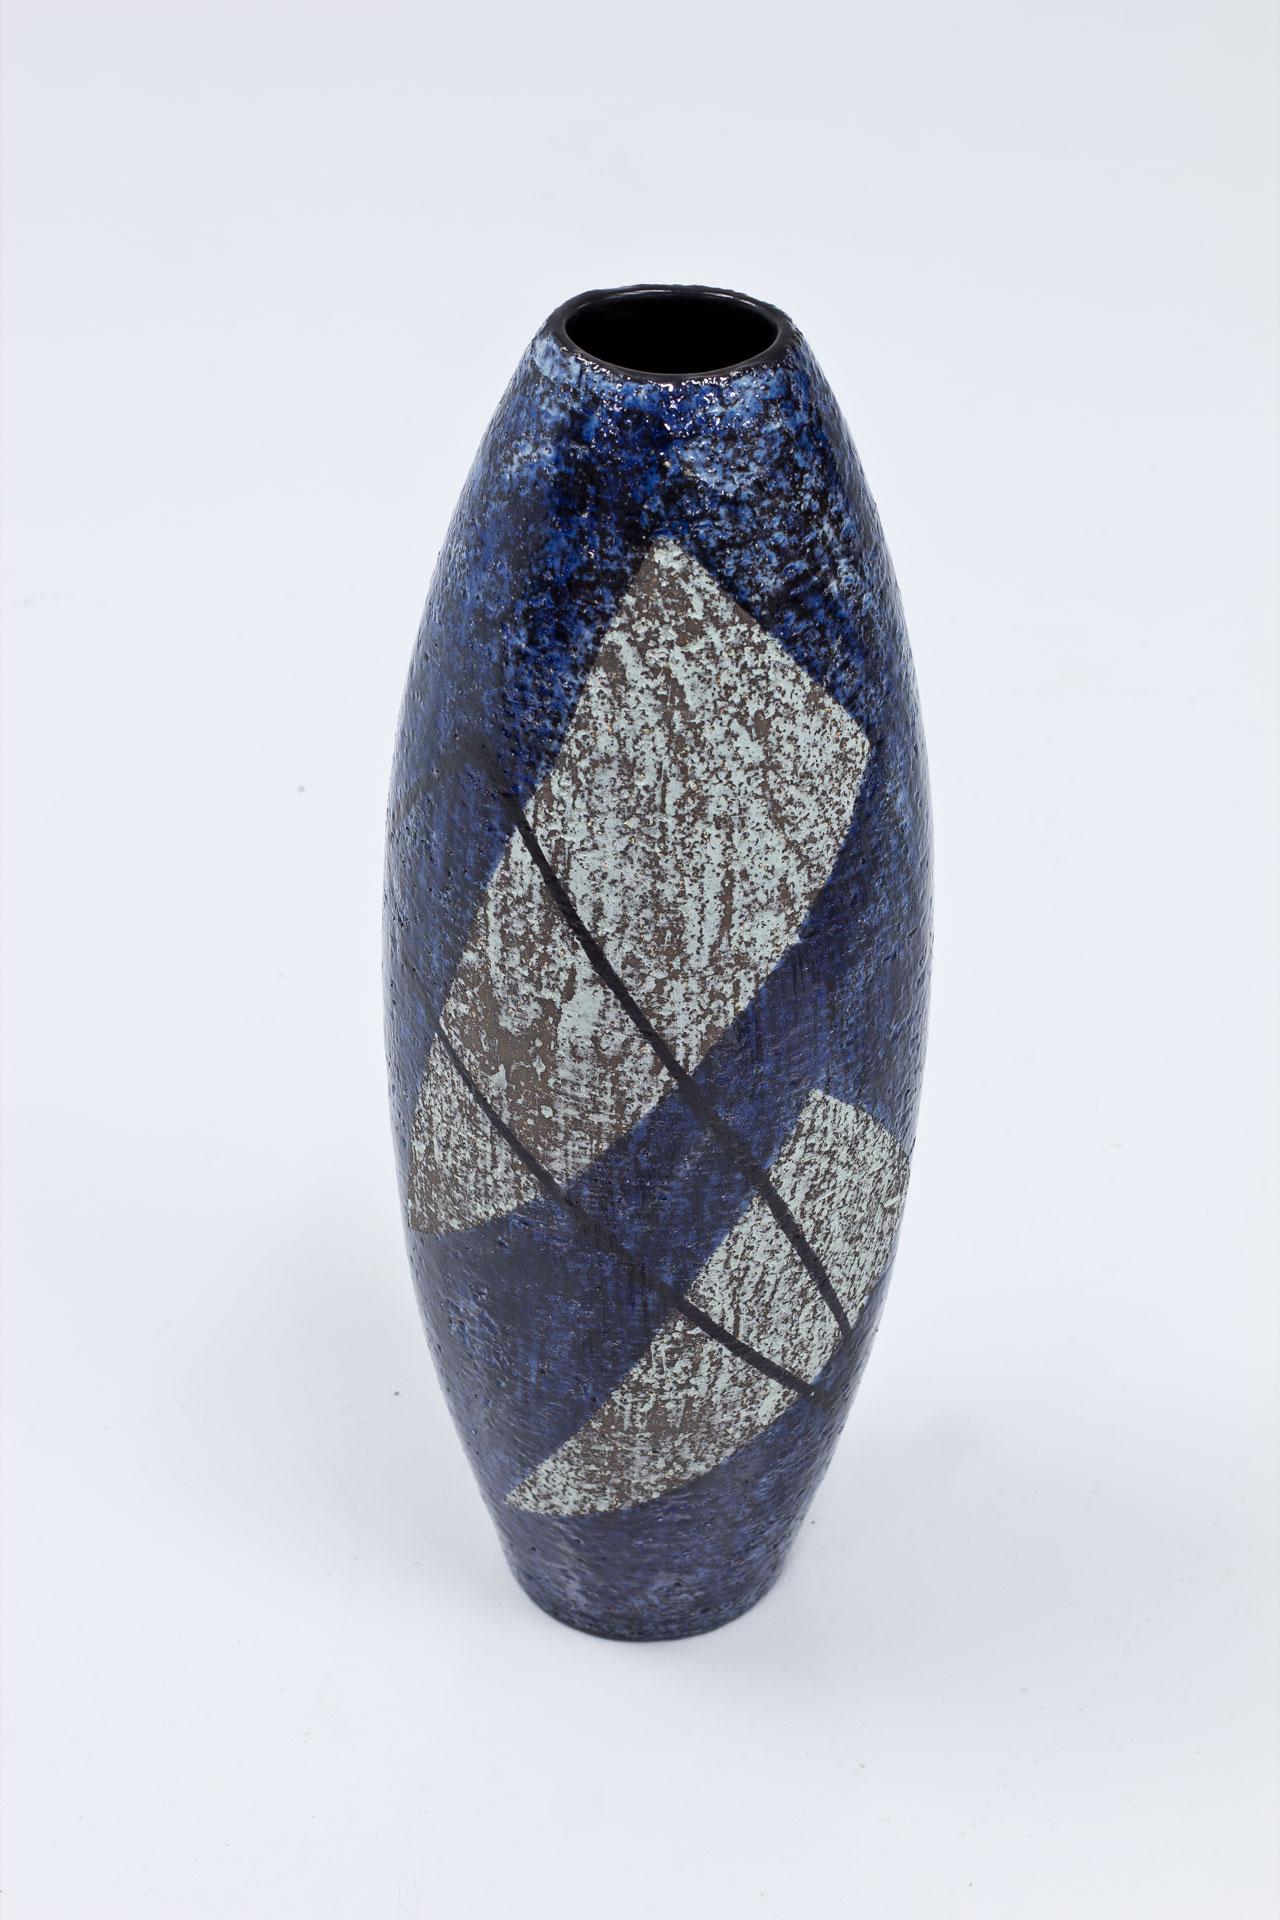 Stoneware floor vase designed by Ingrid Atterberg. 
Manufactured by Upsala-Ekeby in Uppsala, Sweden during the 1950s. 
Rough surface with blue, light green and black glaze. Geometrical pattern.
Stamped by the maker underneath.